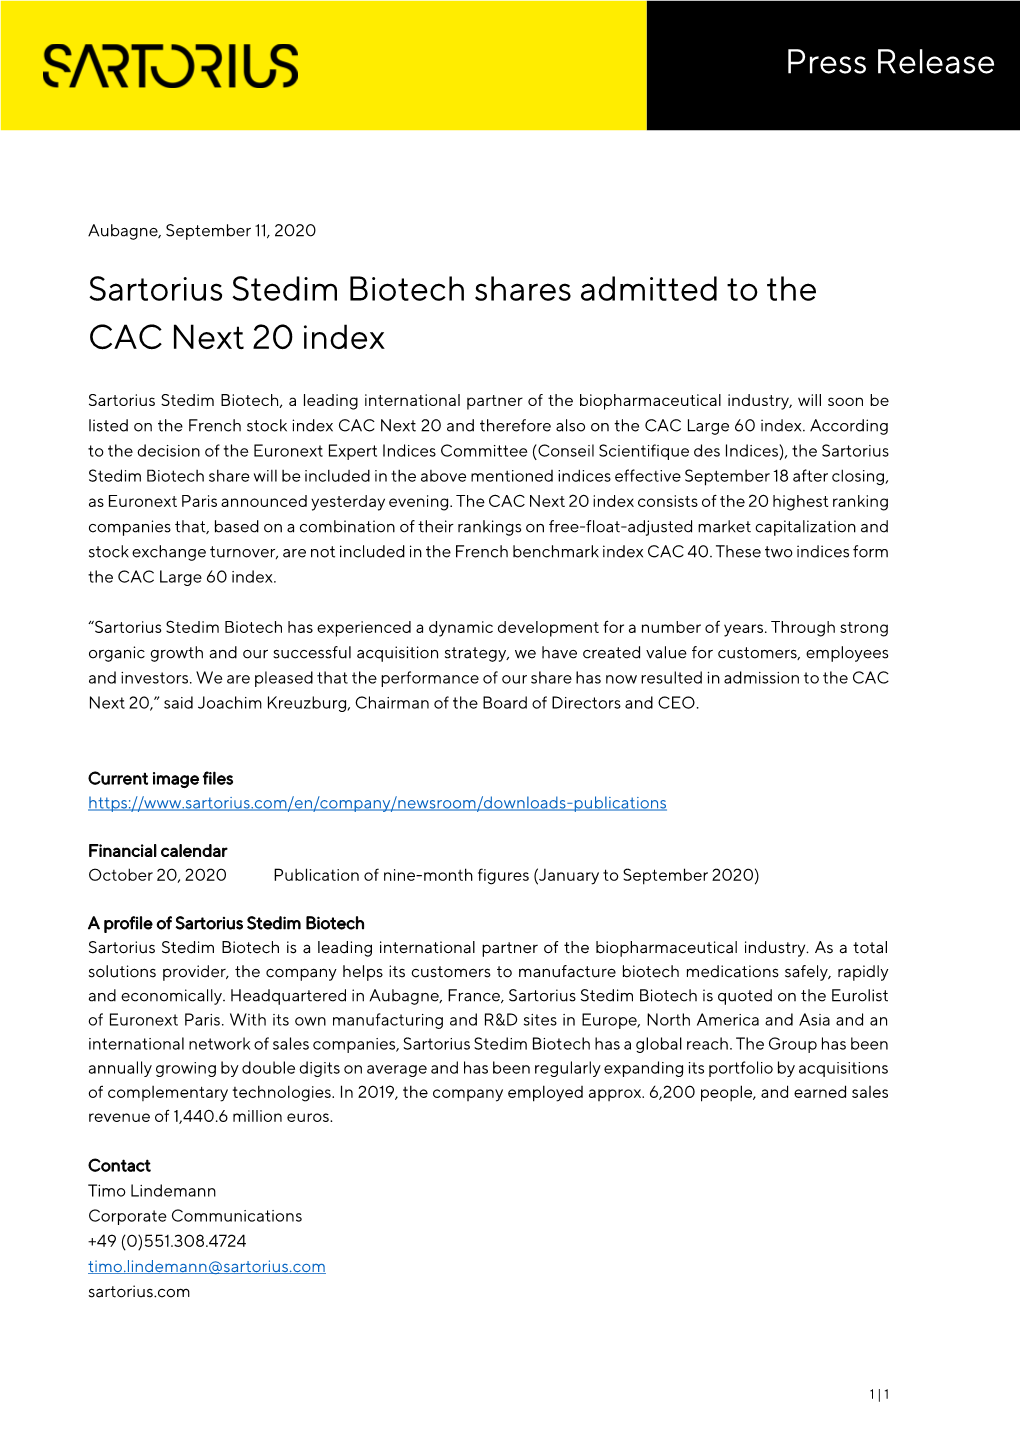 Press Release Sartorius Stedim Biotech Shares Admitted to the CAC